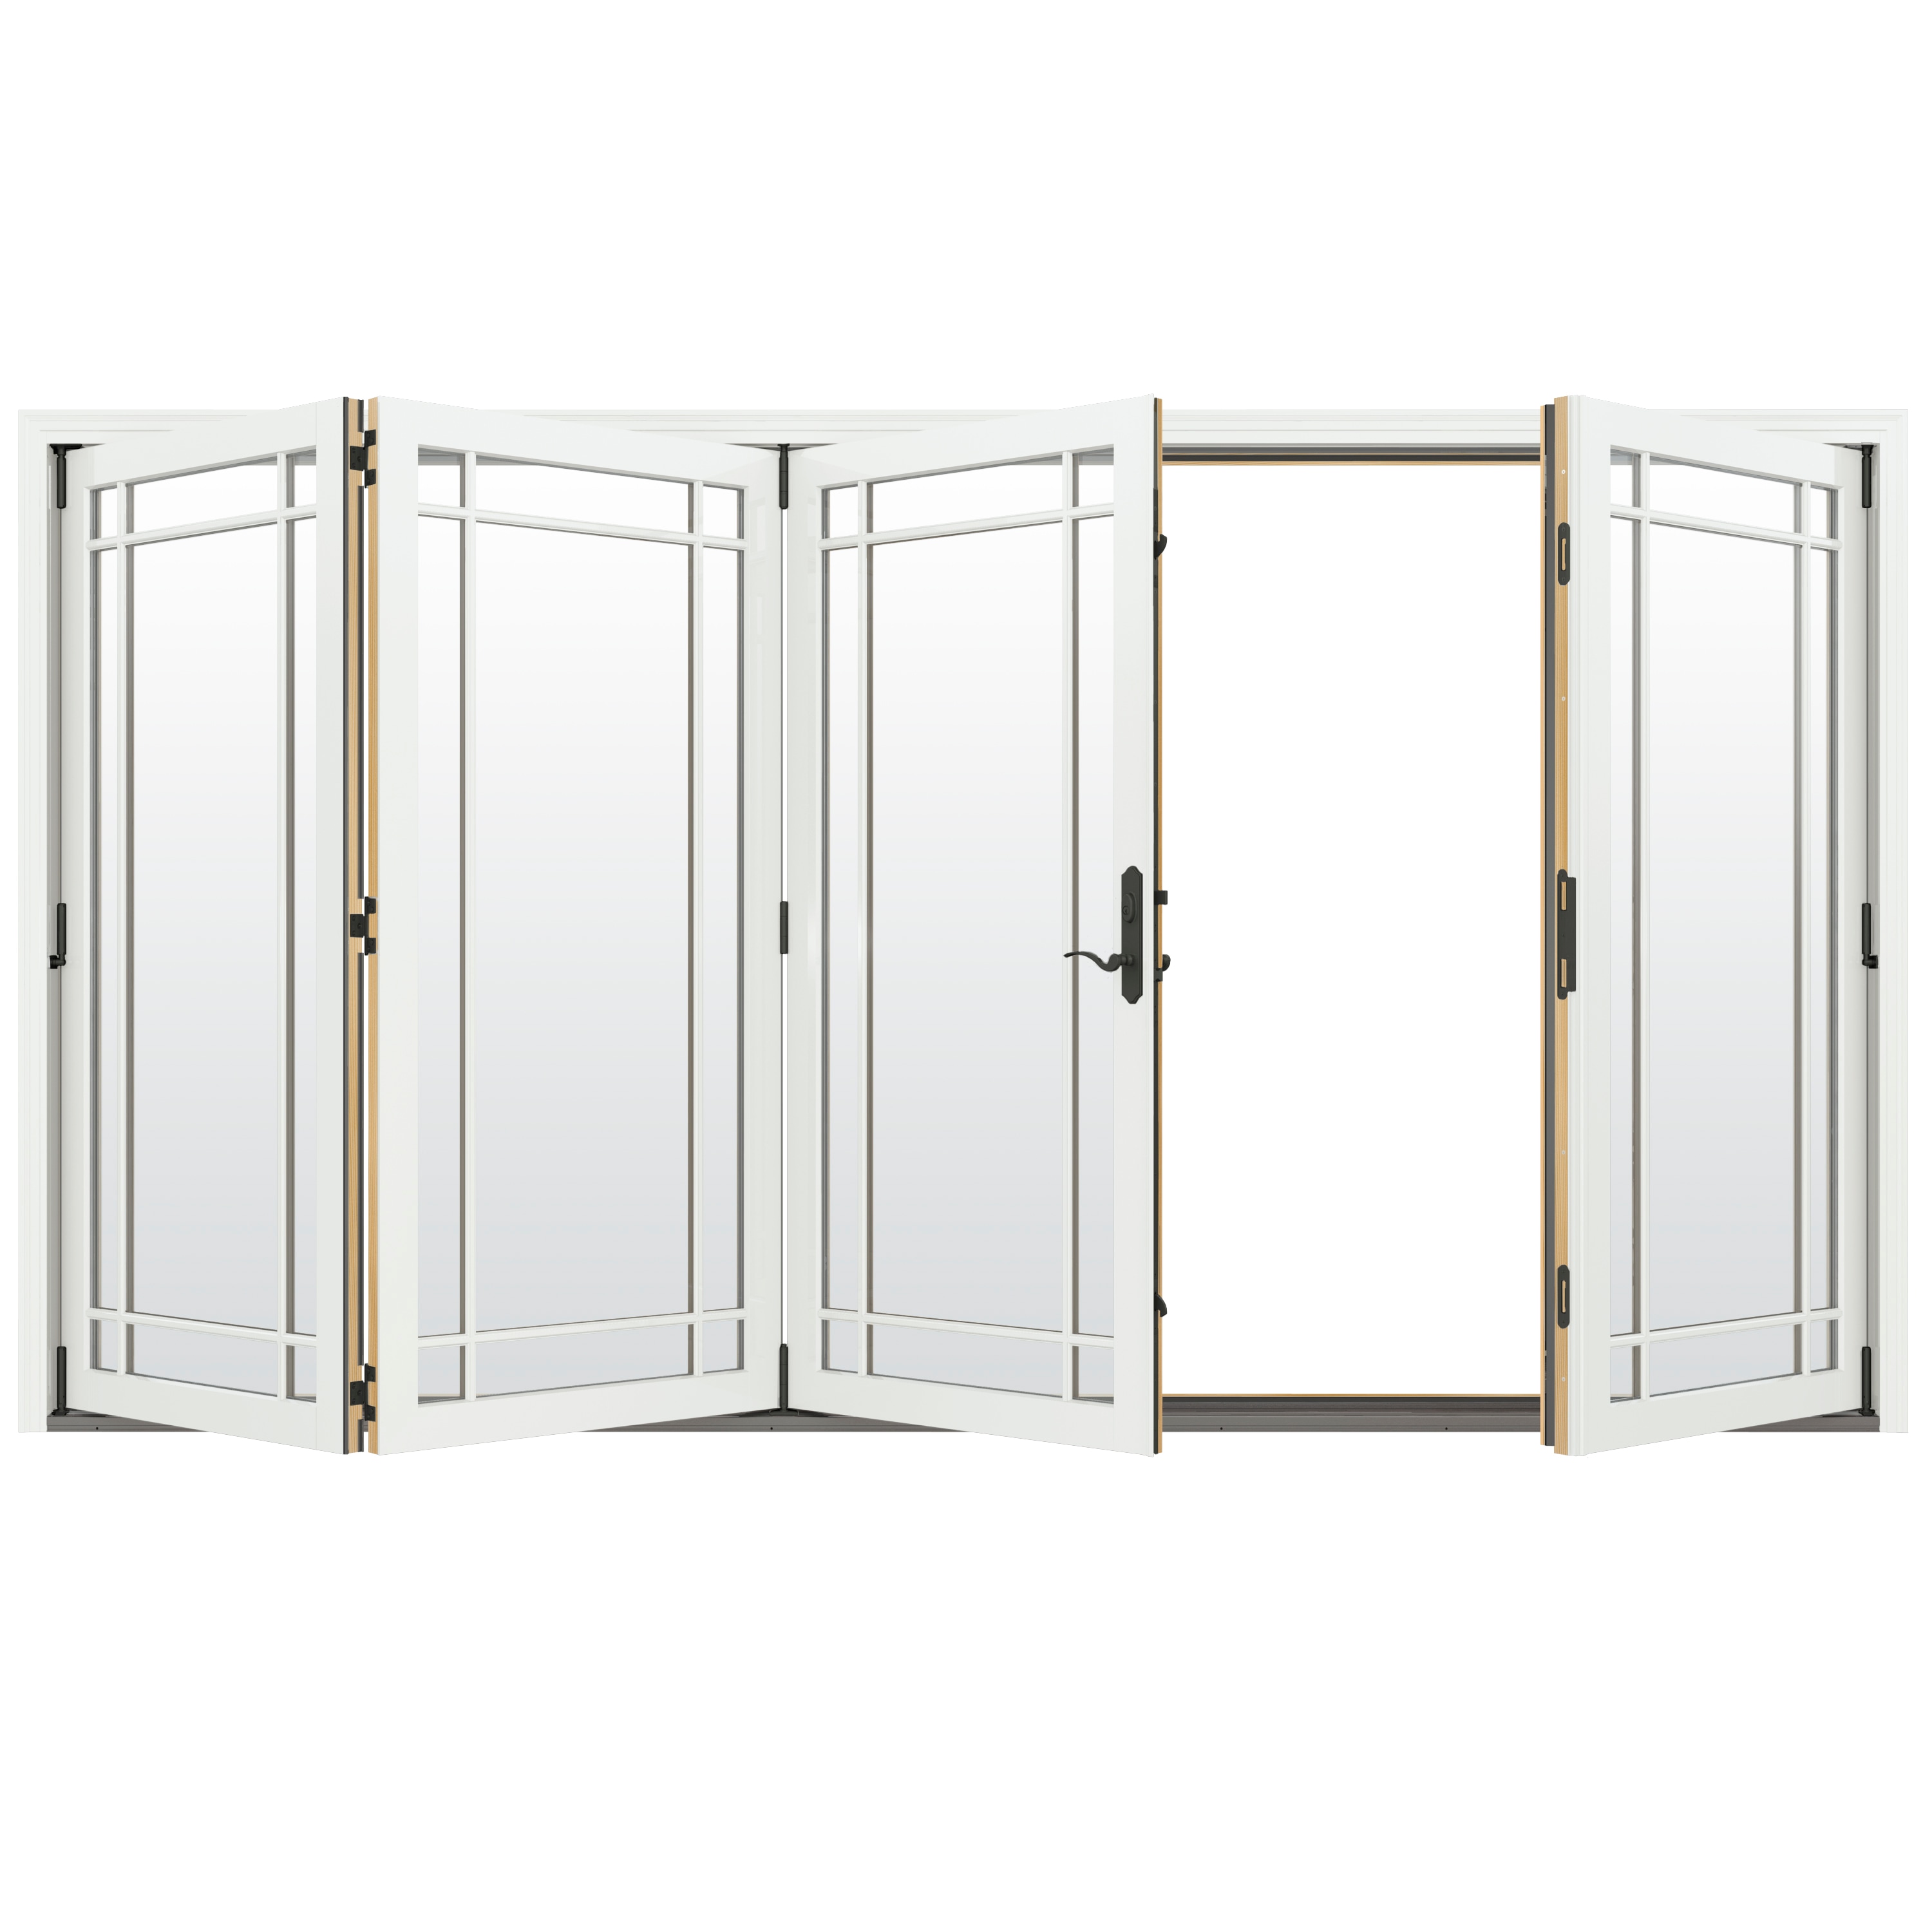 124-in x 80-in Low-e Argon Simulated Divided Light White Clad-wood Folding Left-Hand Outswing Patio Door | - JELD-WEN LOWOLJW247800055